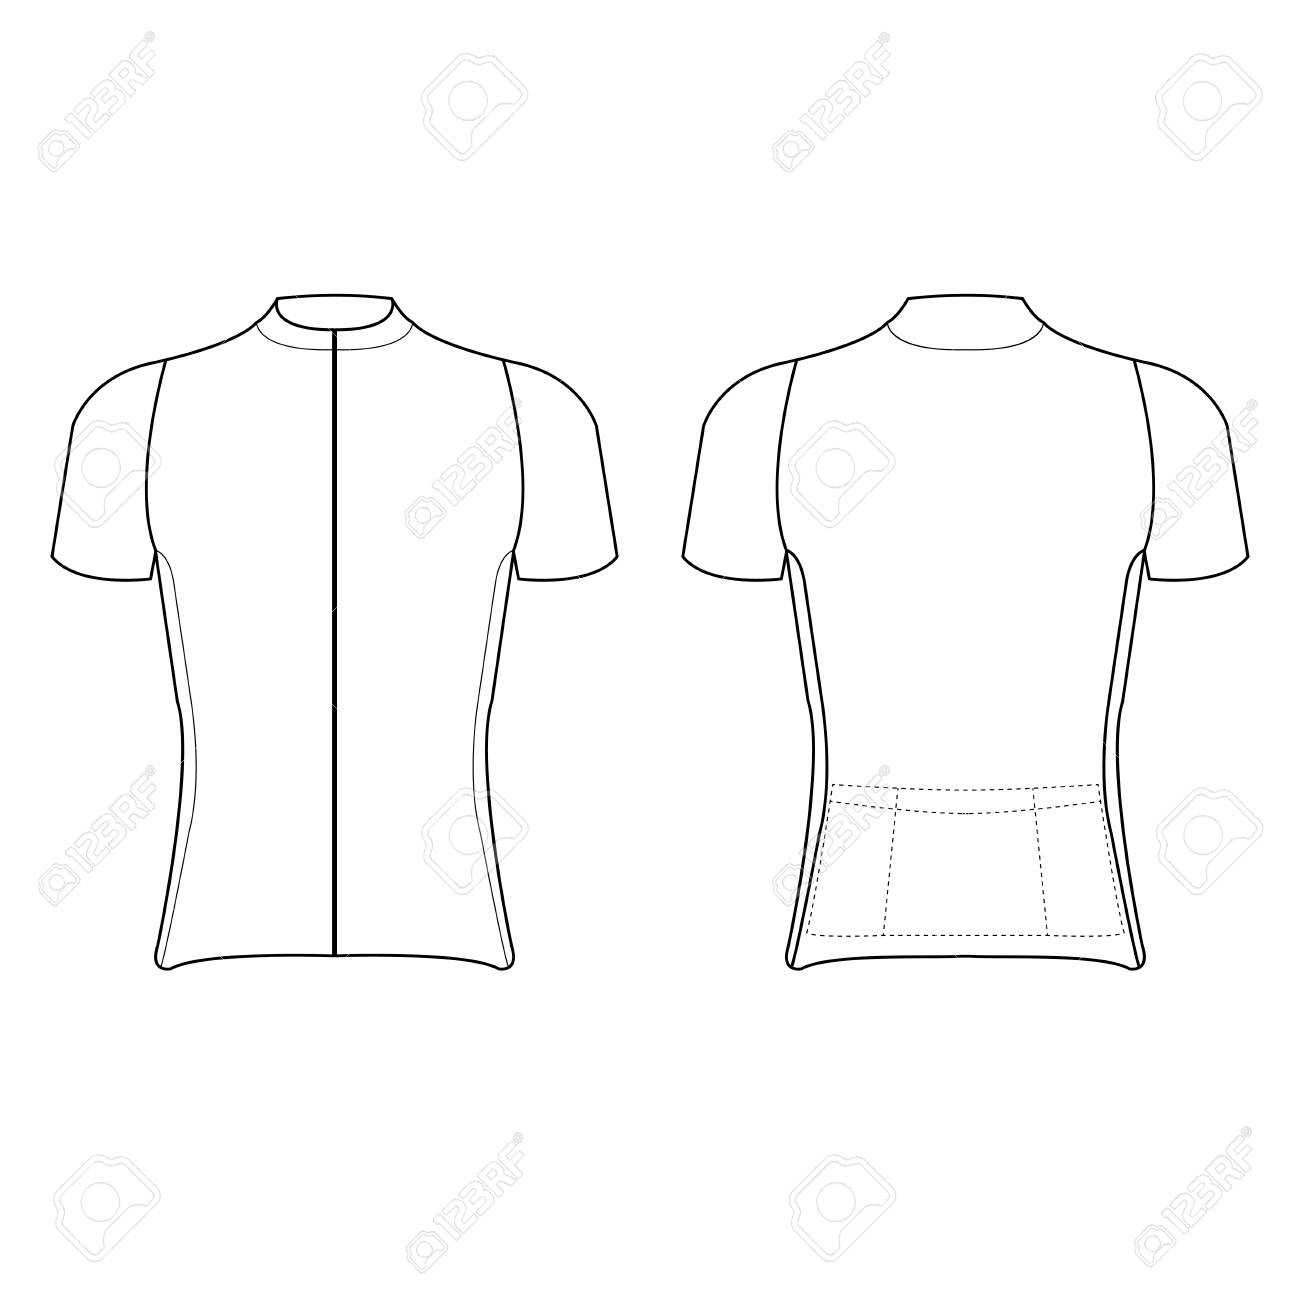 Cycling Jersey Design Blank Of Cycling Jersey Vector Illustration Pertaining To Blank Cycling Jersey Template